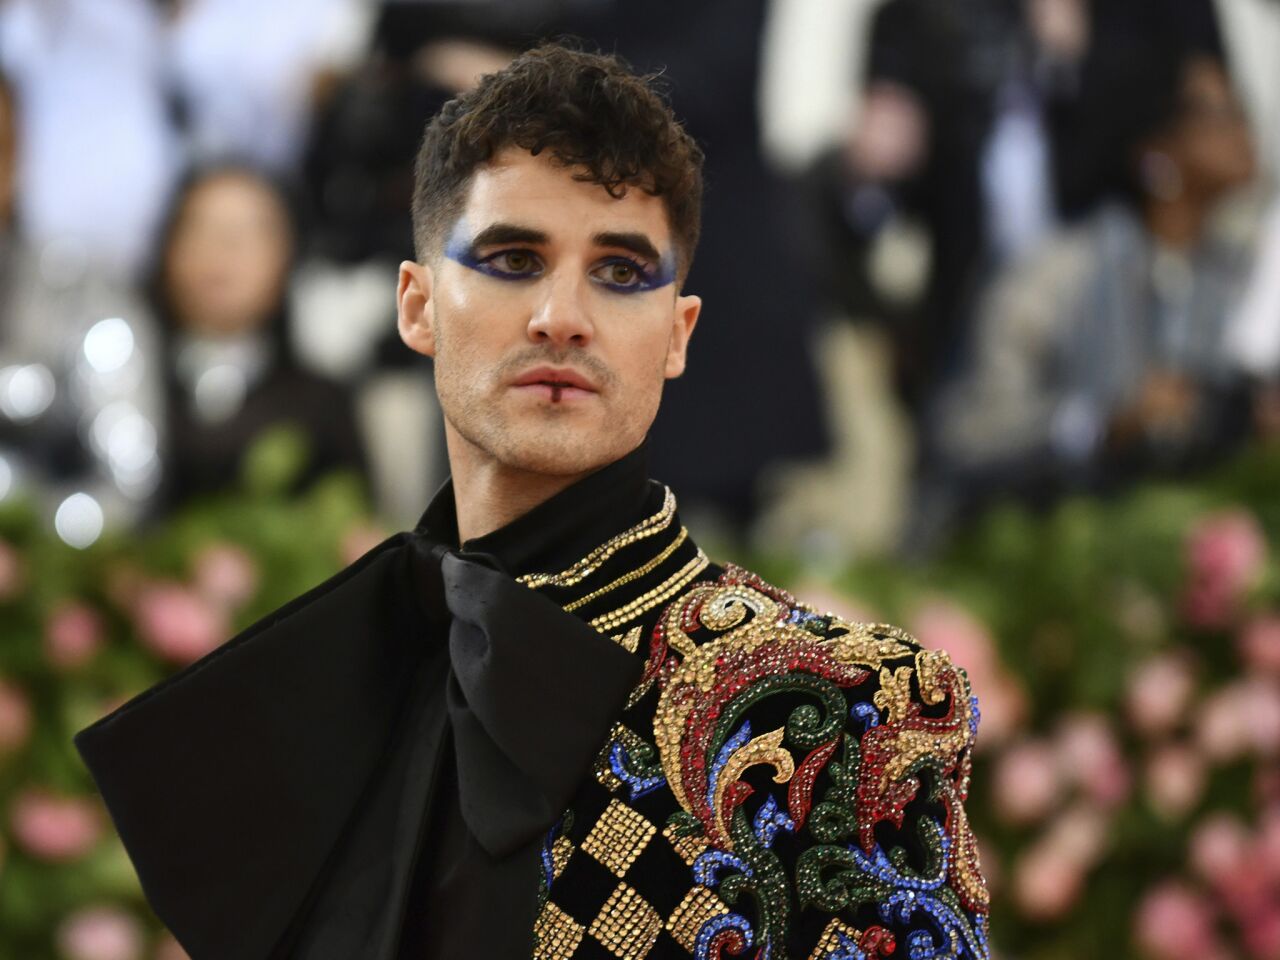 Actor Darren Criss wears a harlequin jacket and dramatic eye makeup for this year's Met Gala.